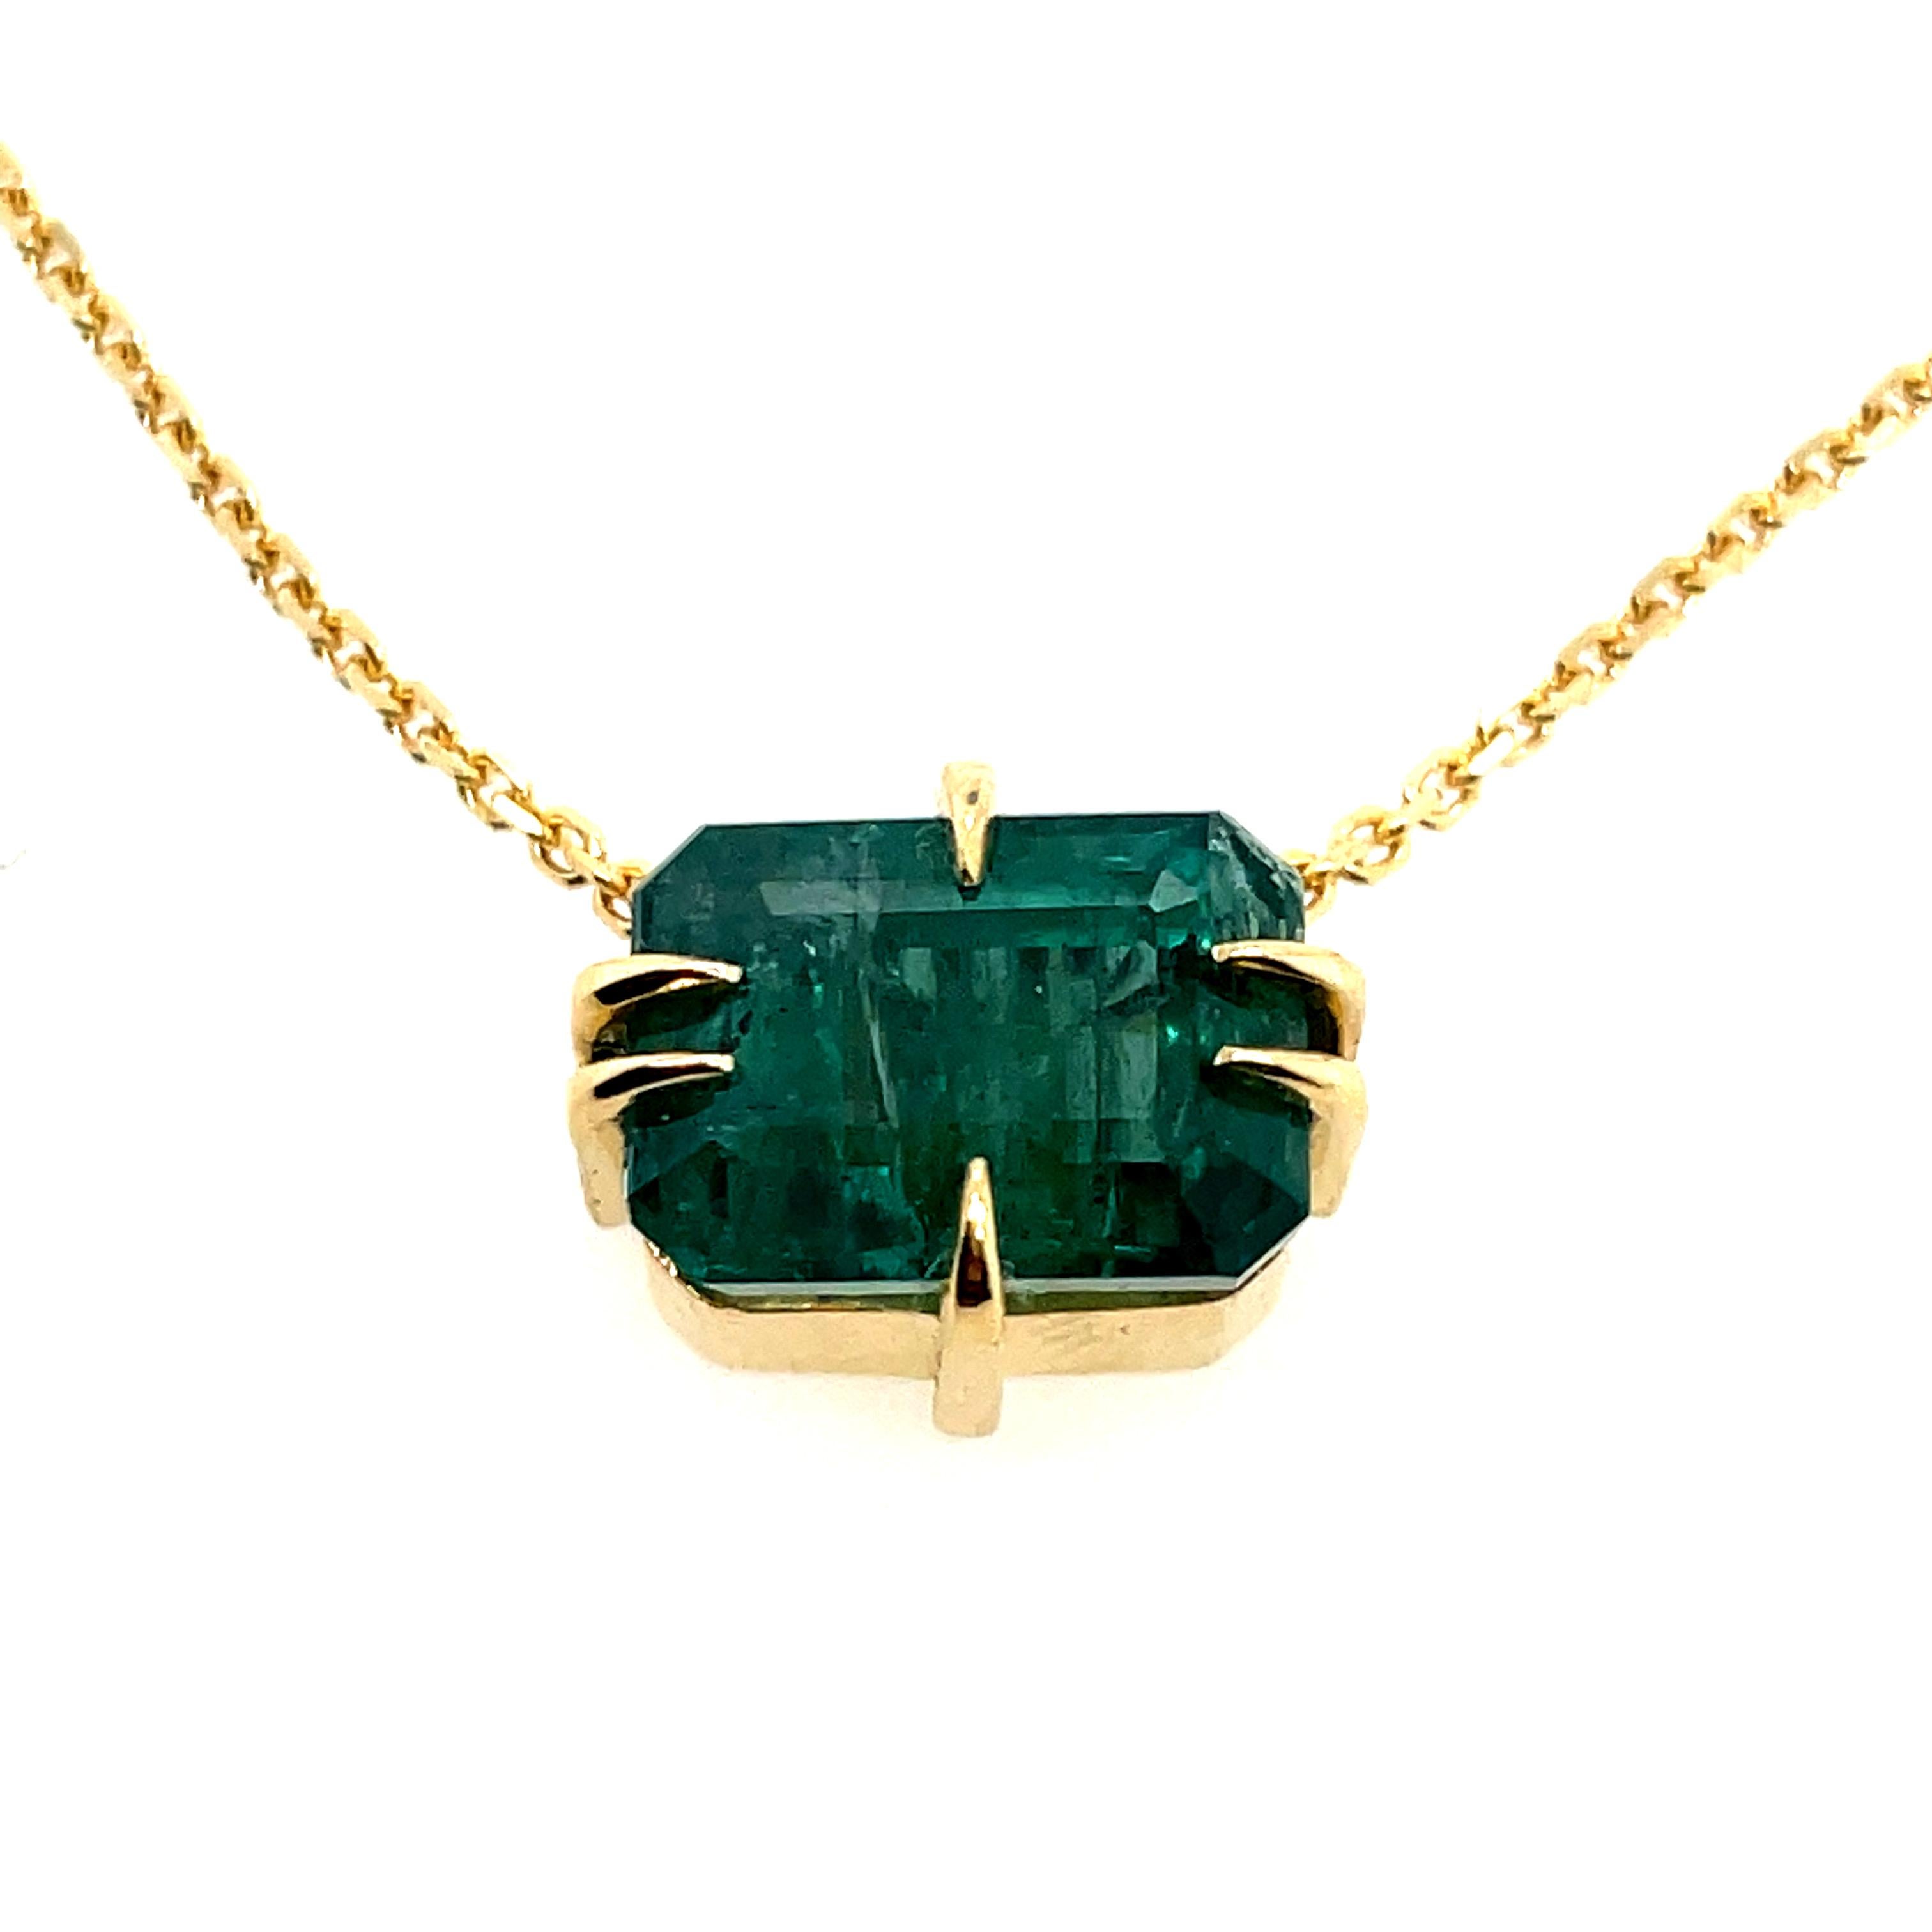 
3.50ct Lustrous forest green Emerald cut Emerald set in fierce claws in 18ct yellow gold with 40cm 18ct yellow gold chain.

Zambian emerald
Emerald cut
18k gold
40cm 18k chain
Ohliguer signature claws
Ready to ship in gift box
Comes with